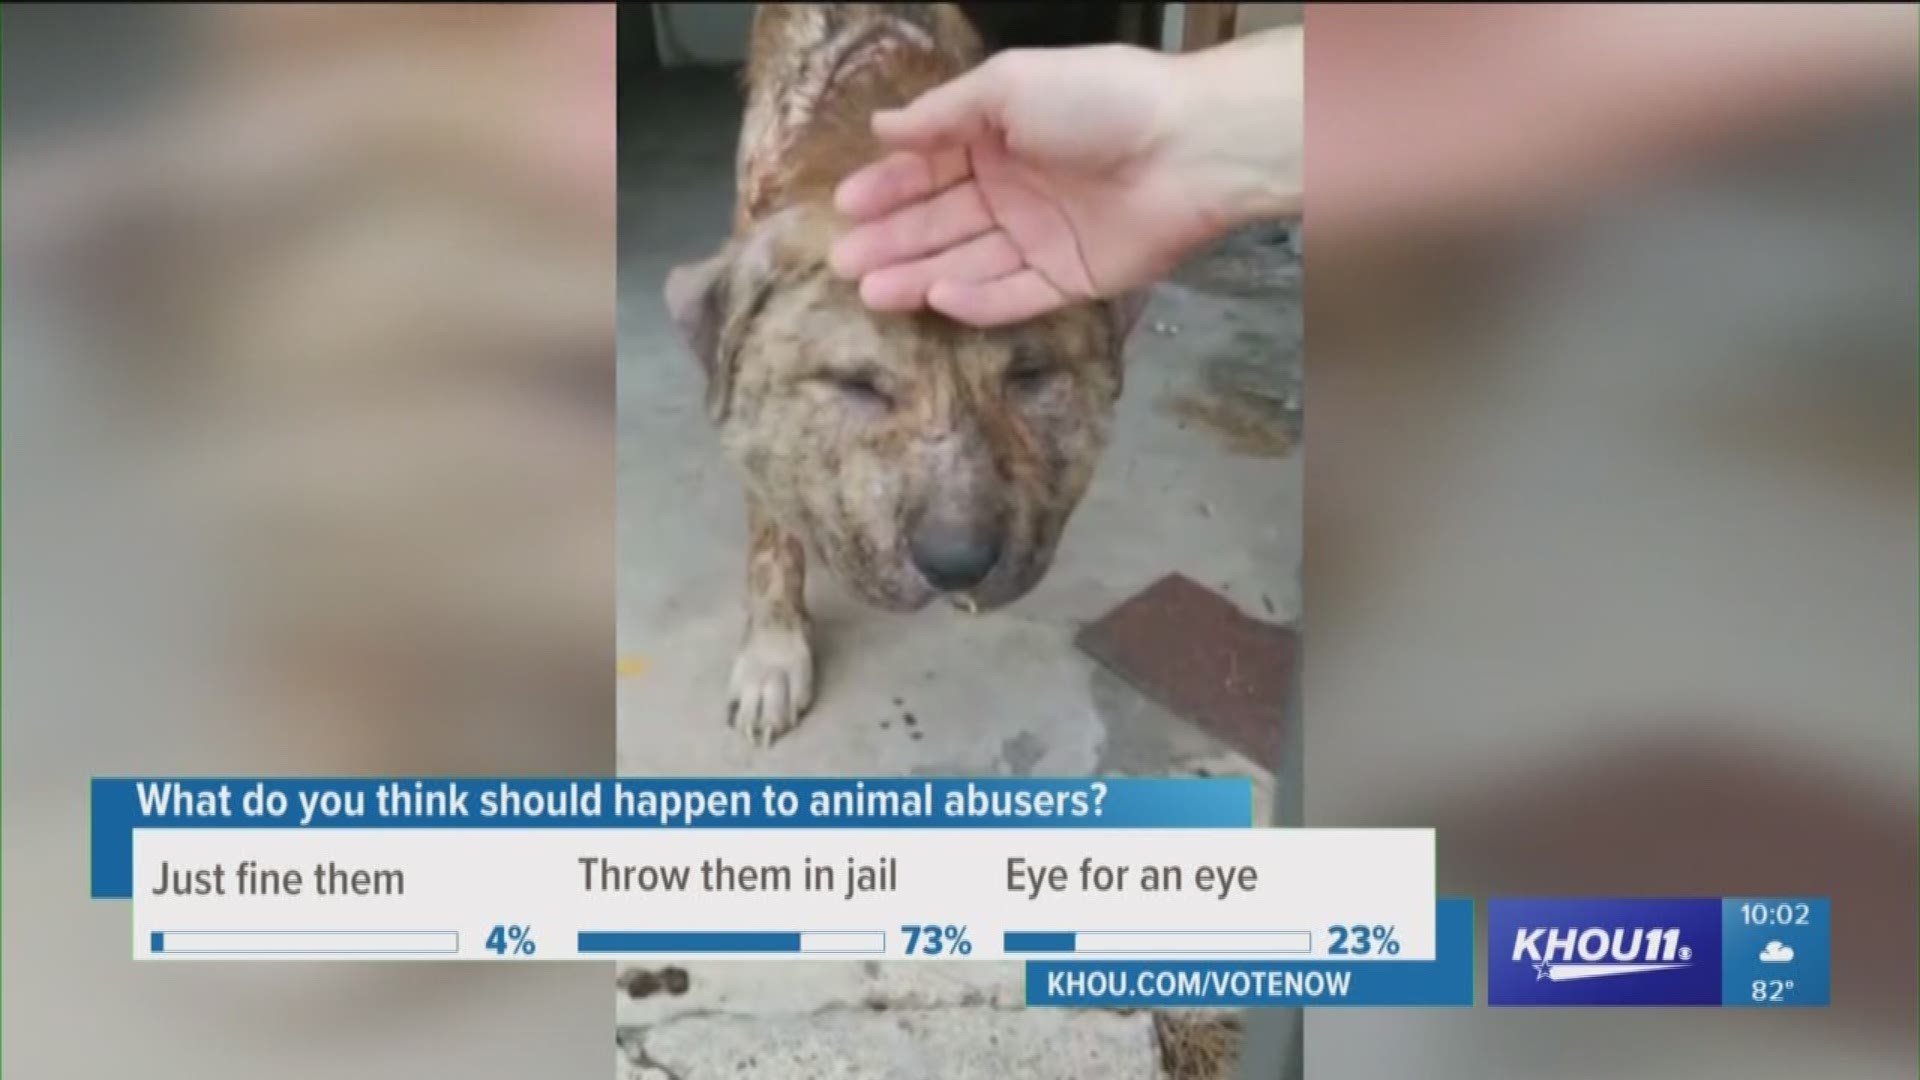 Some kindhearted Houstonians have rallied around a stray dog found riddled with pellets and a severely swollen head and neck.